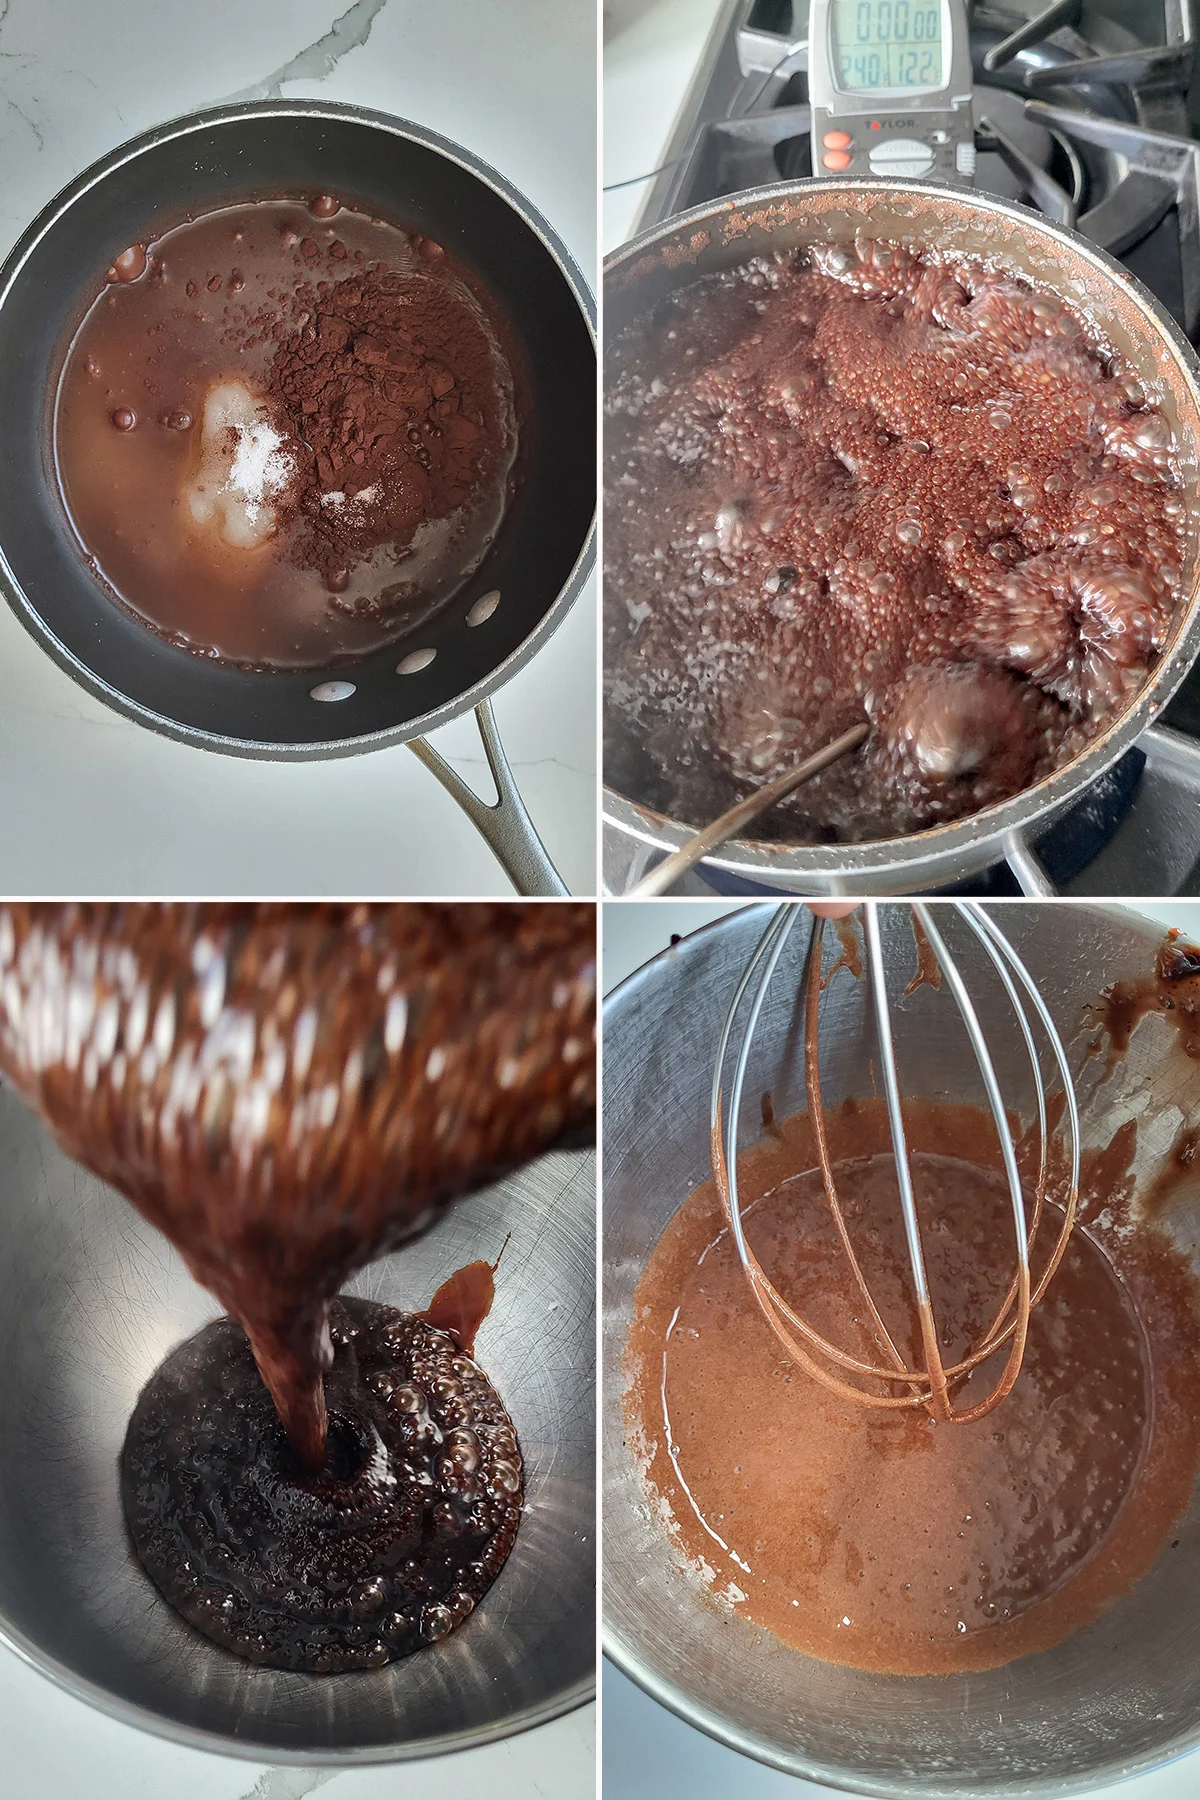 Chocolate sugar syrup in a pan. Chocolate gelatin whipped in a bowl.